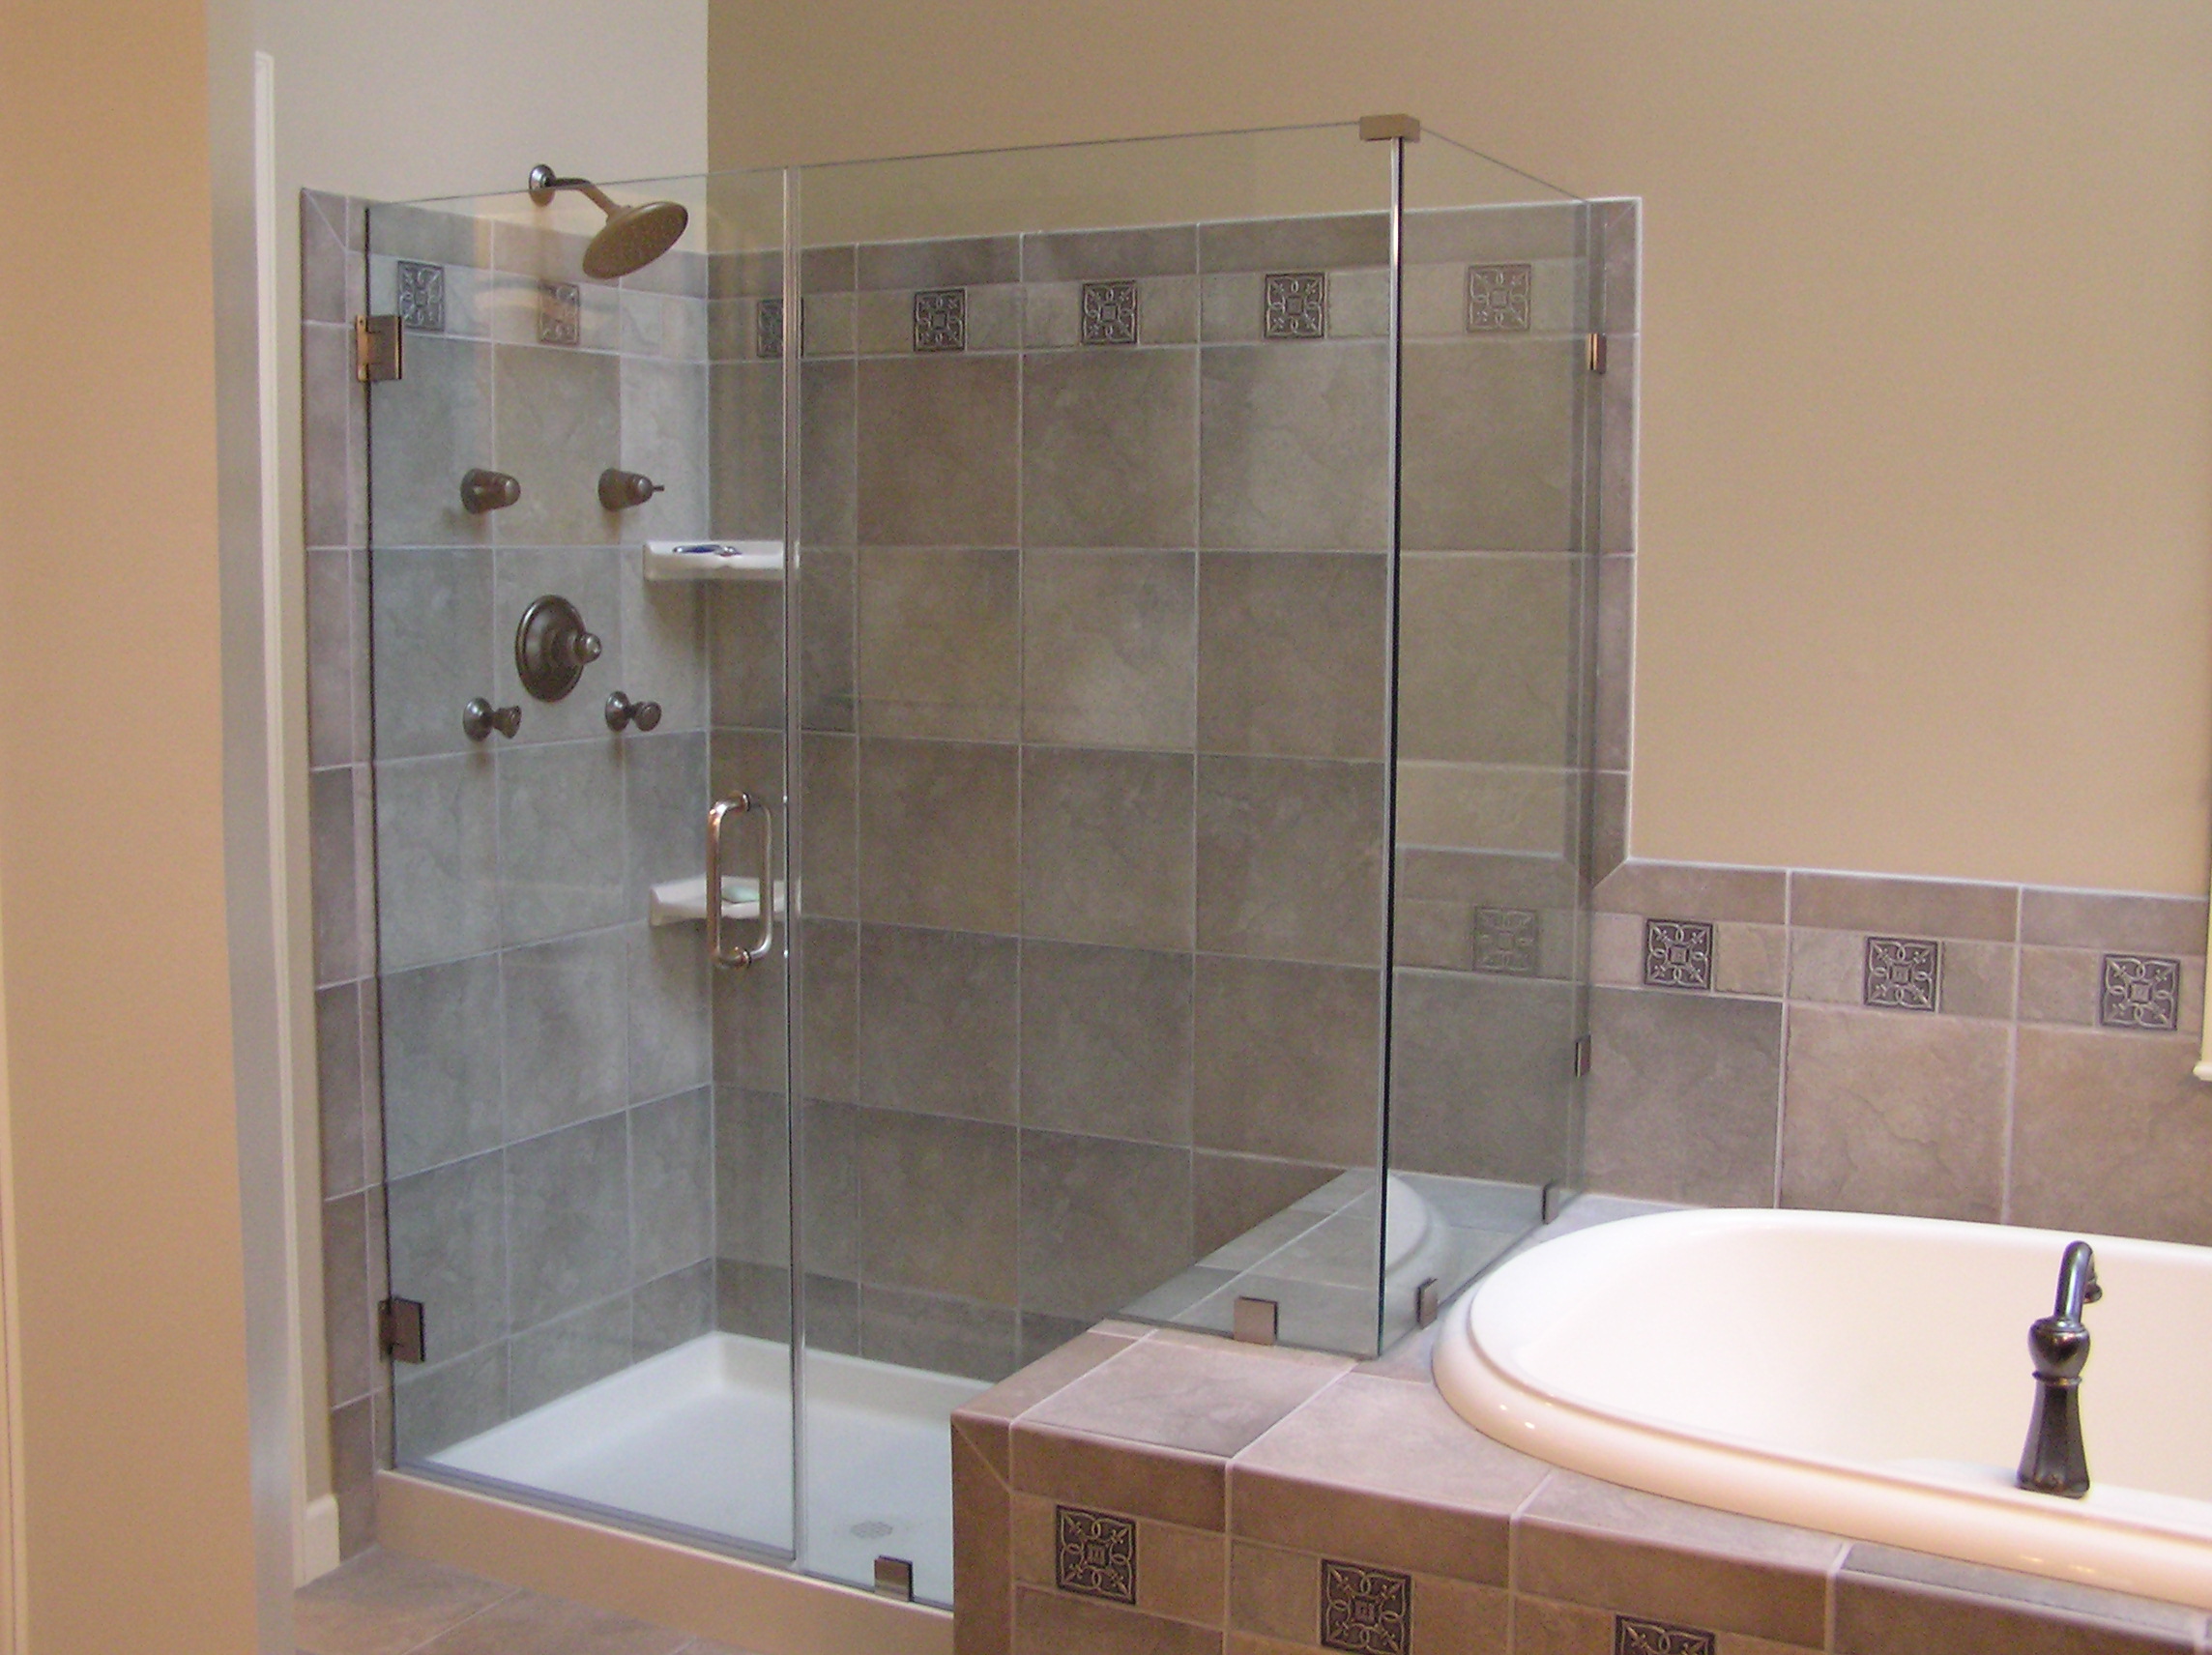 bathroom remodeling cost photo - 1